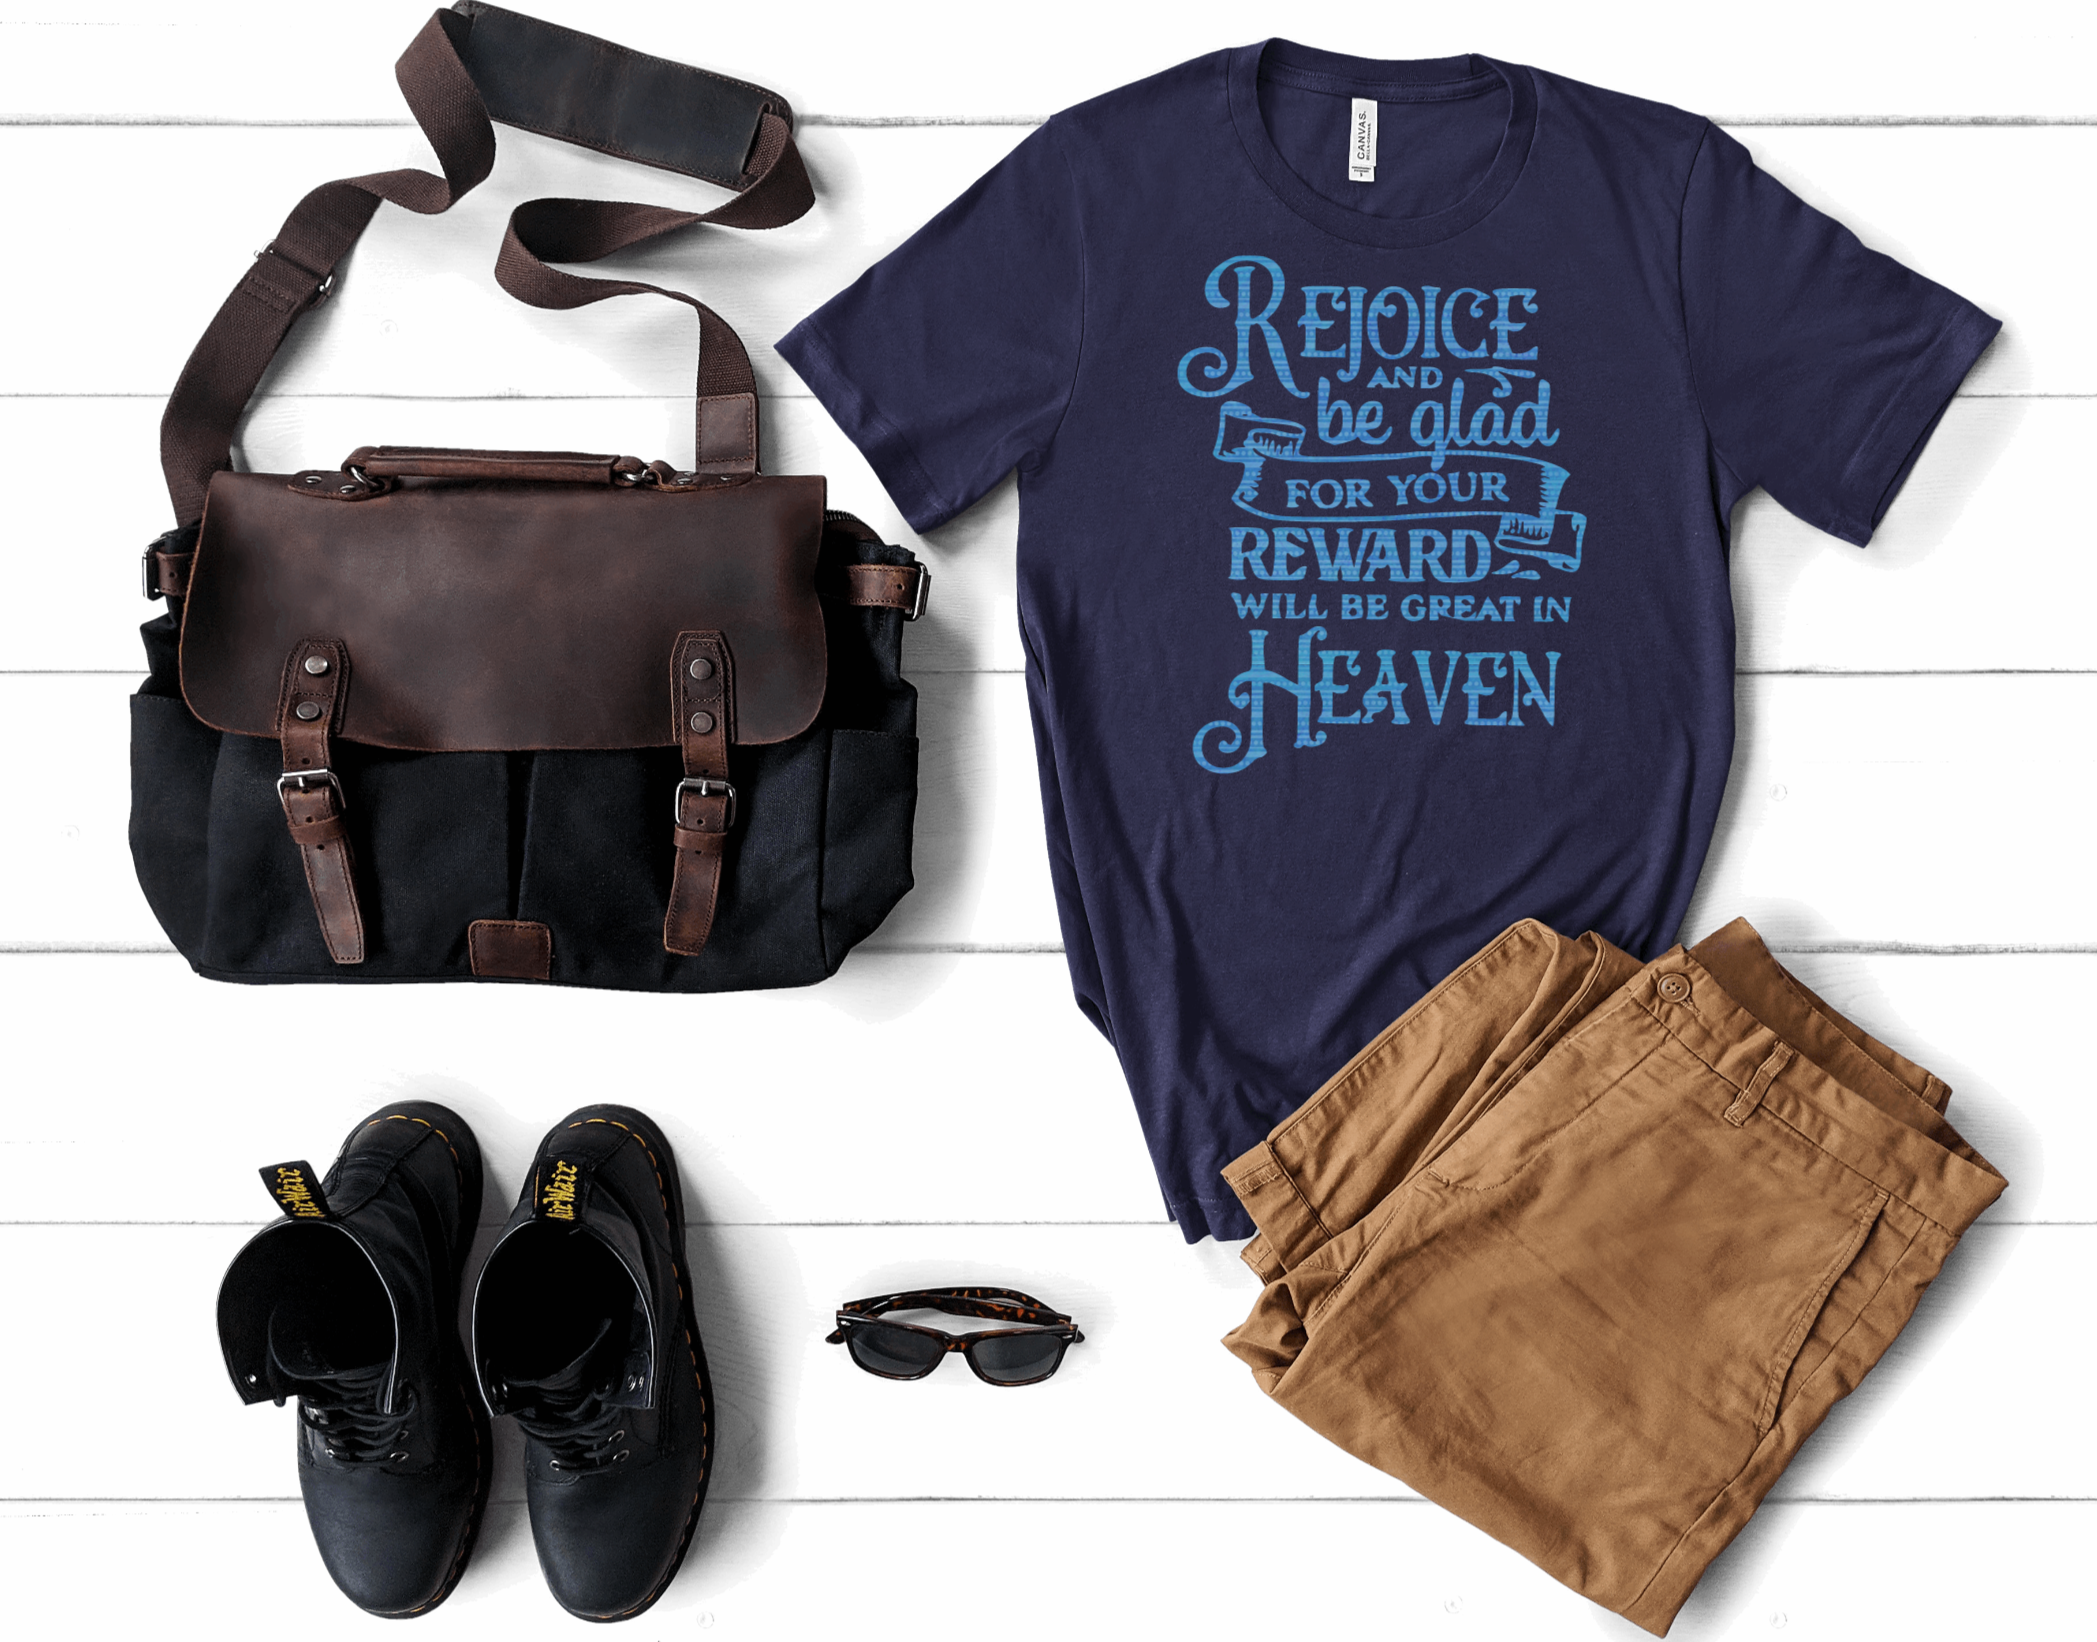 Rejoice And Be Glad Short Sleeve Tshirt For Him